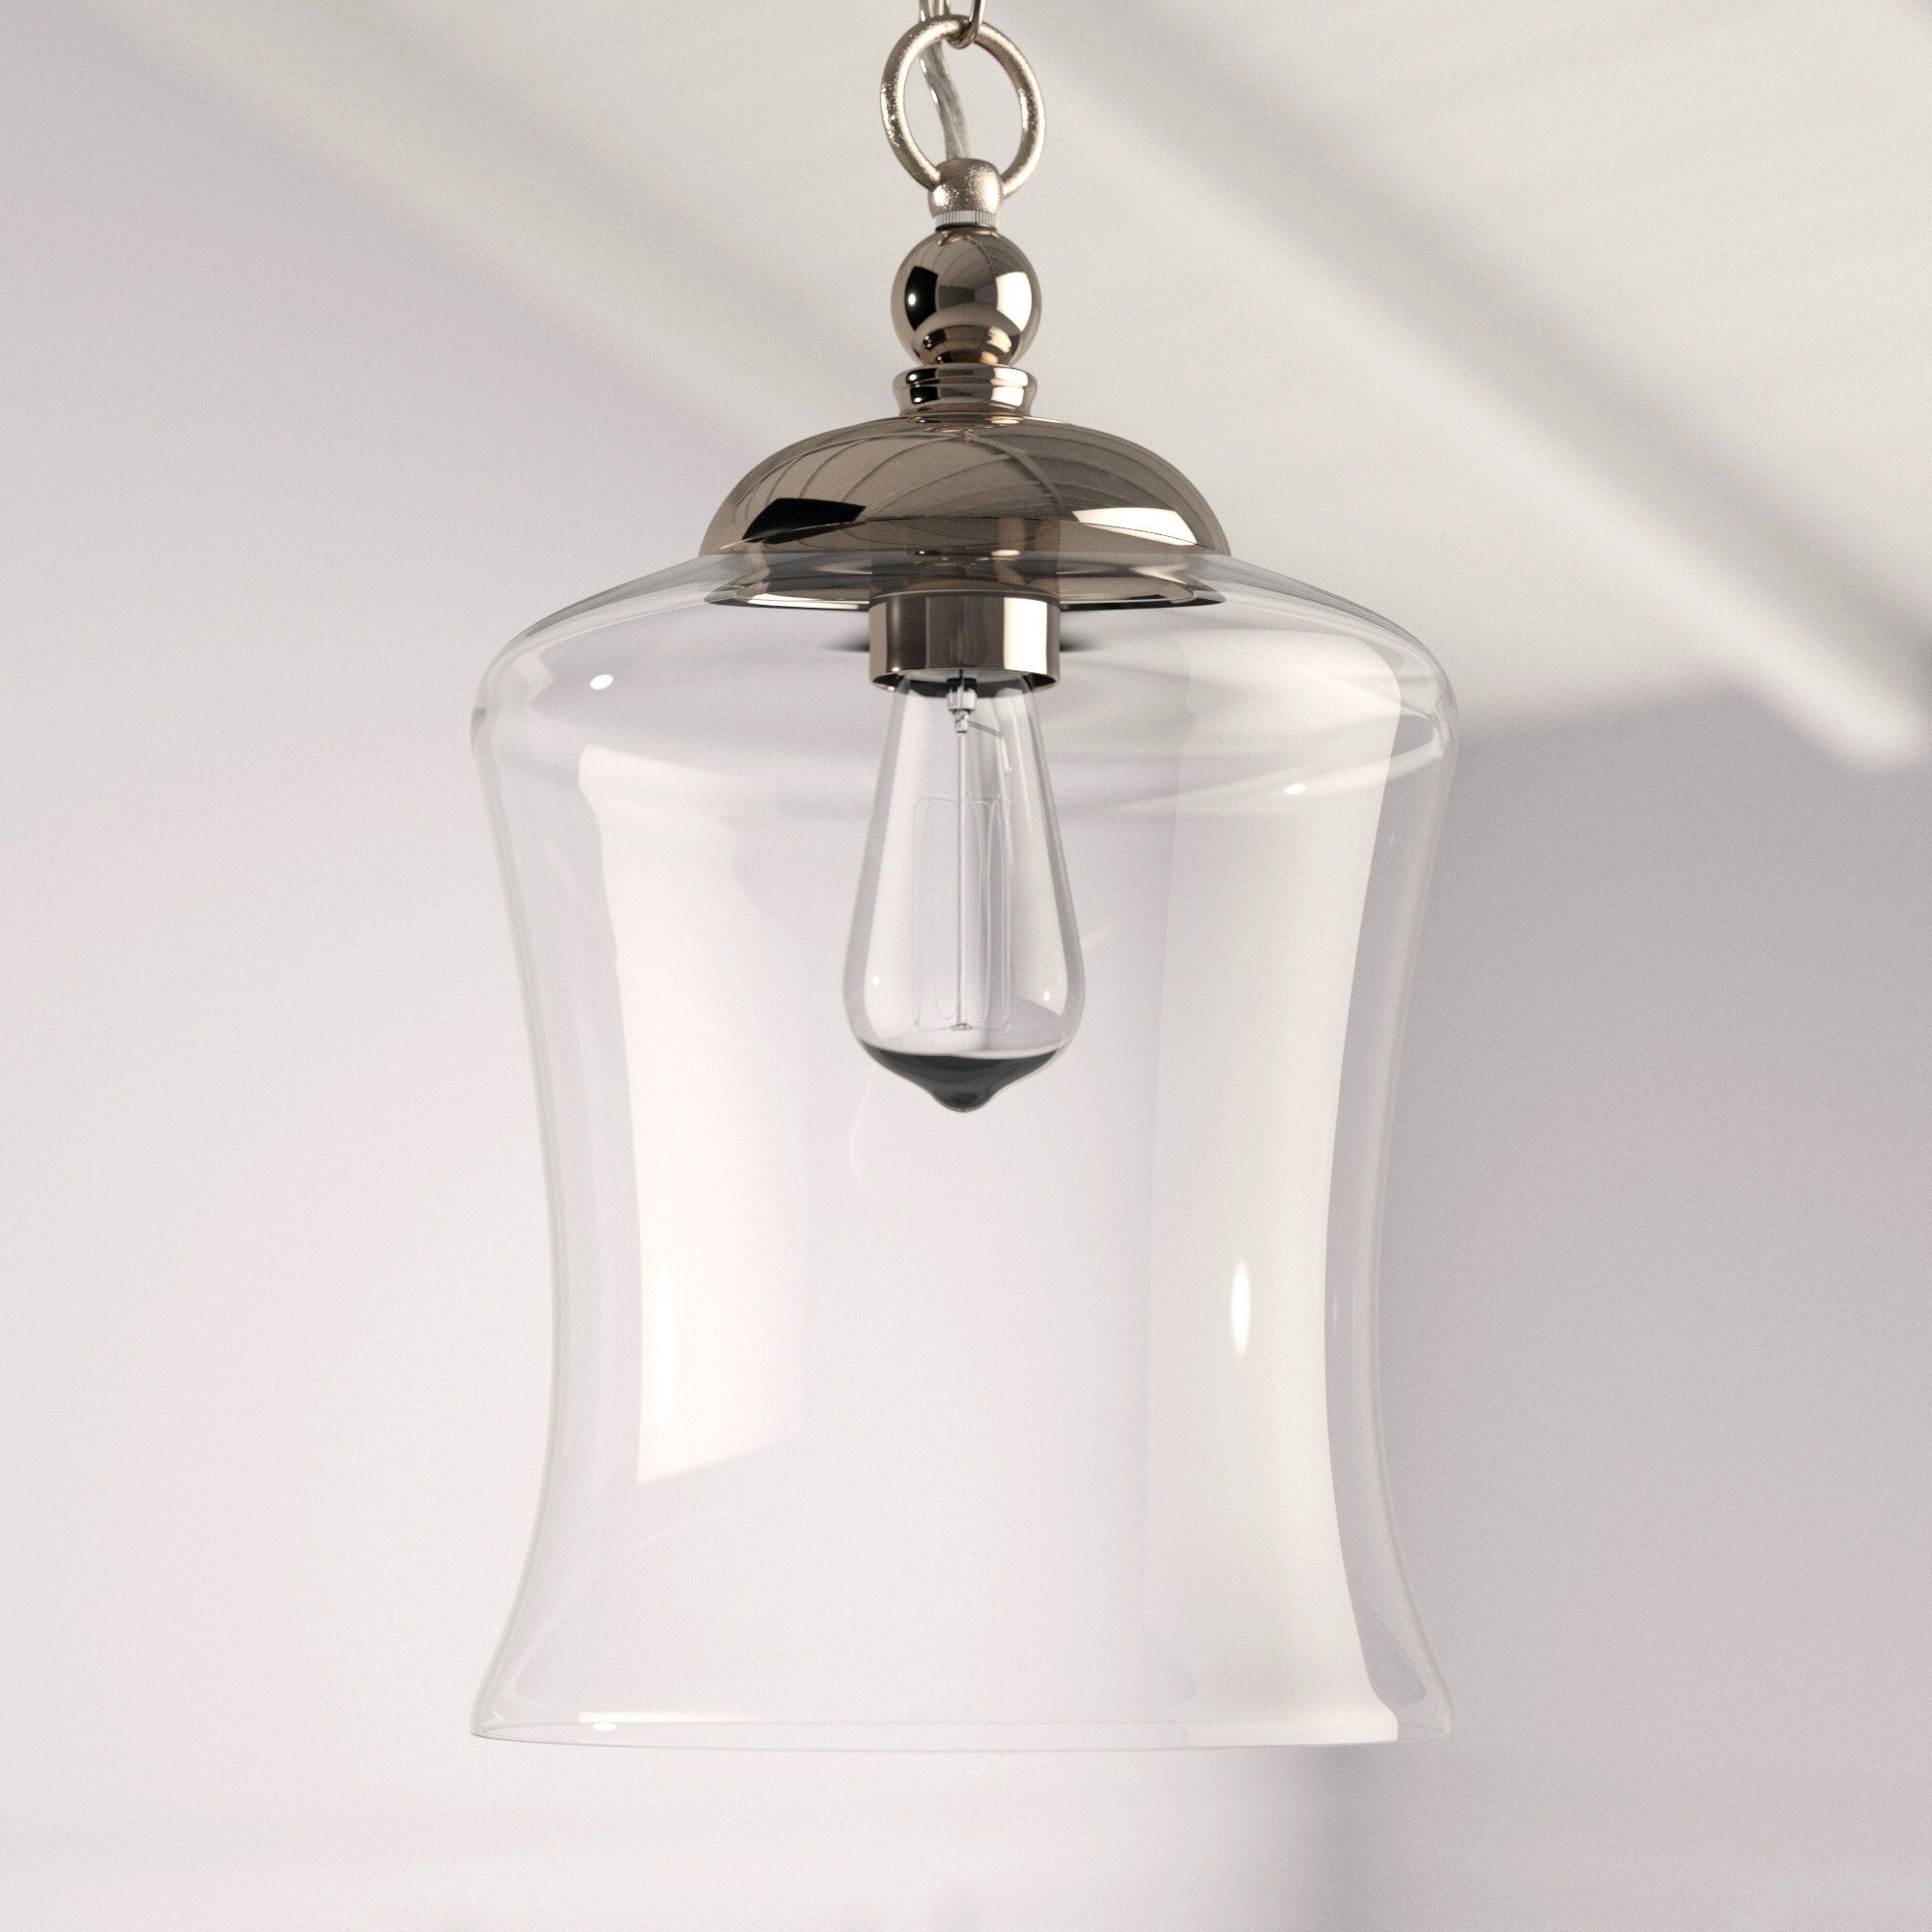 Fashionable Wentzville 1 Light Single Bell Pendants Intended For Wentzville 1 Light Single Bell Pendant (View 3 of 25)